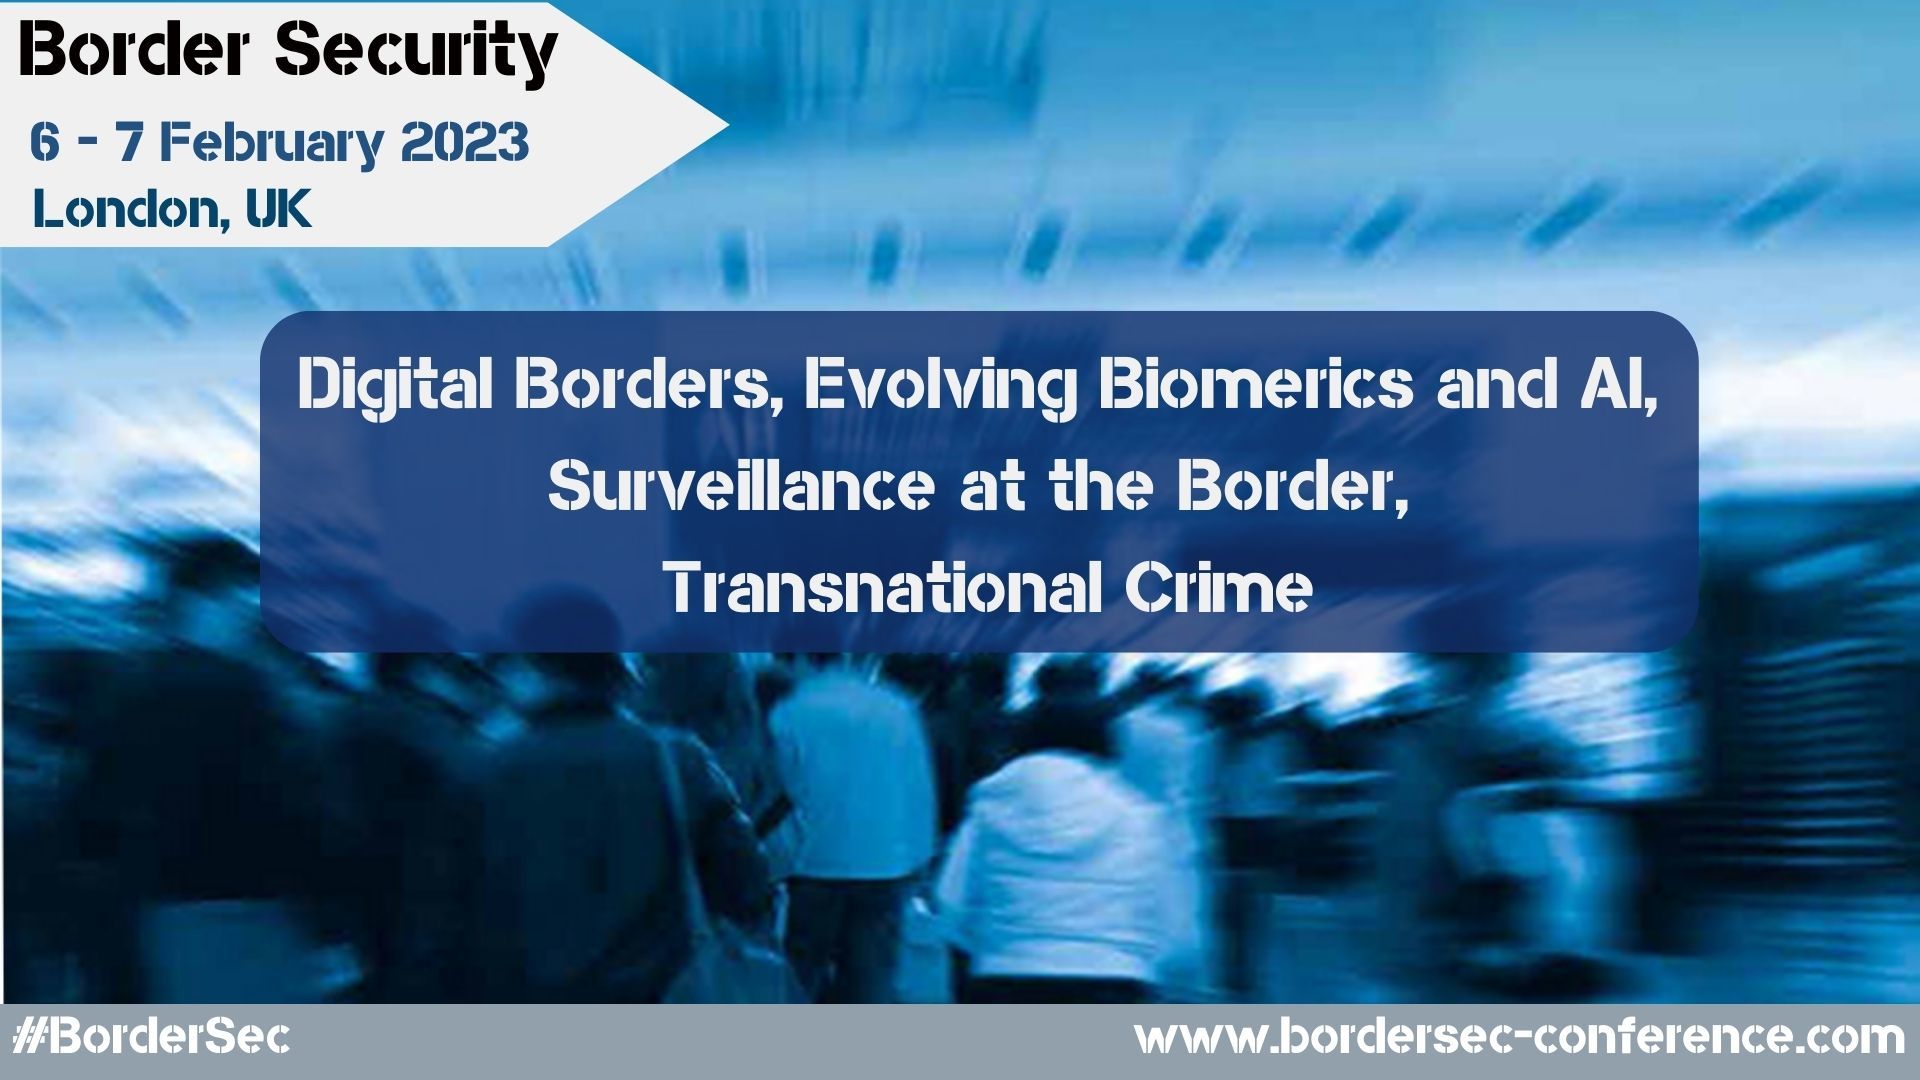 15th Annual Border Security Conference, London, United Kingdom